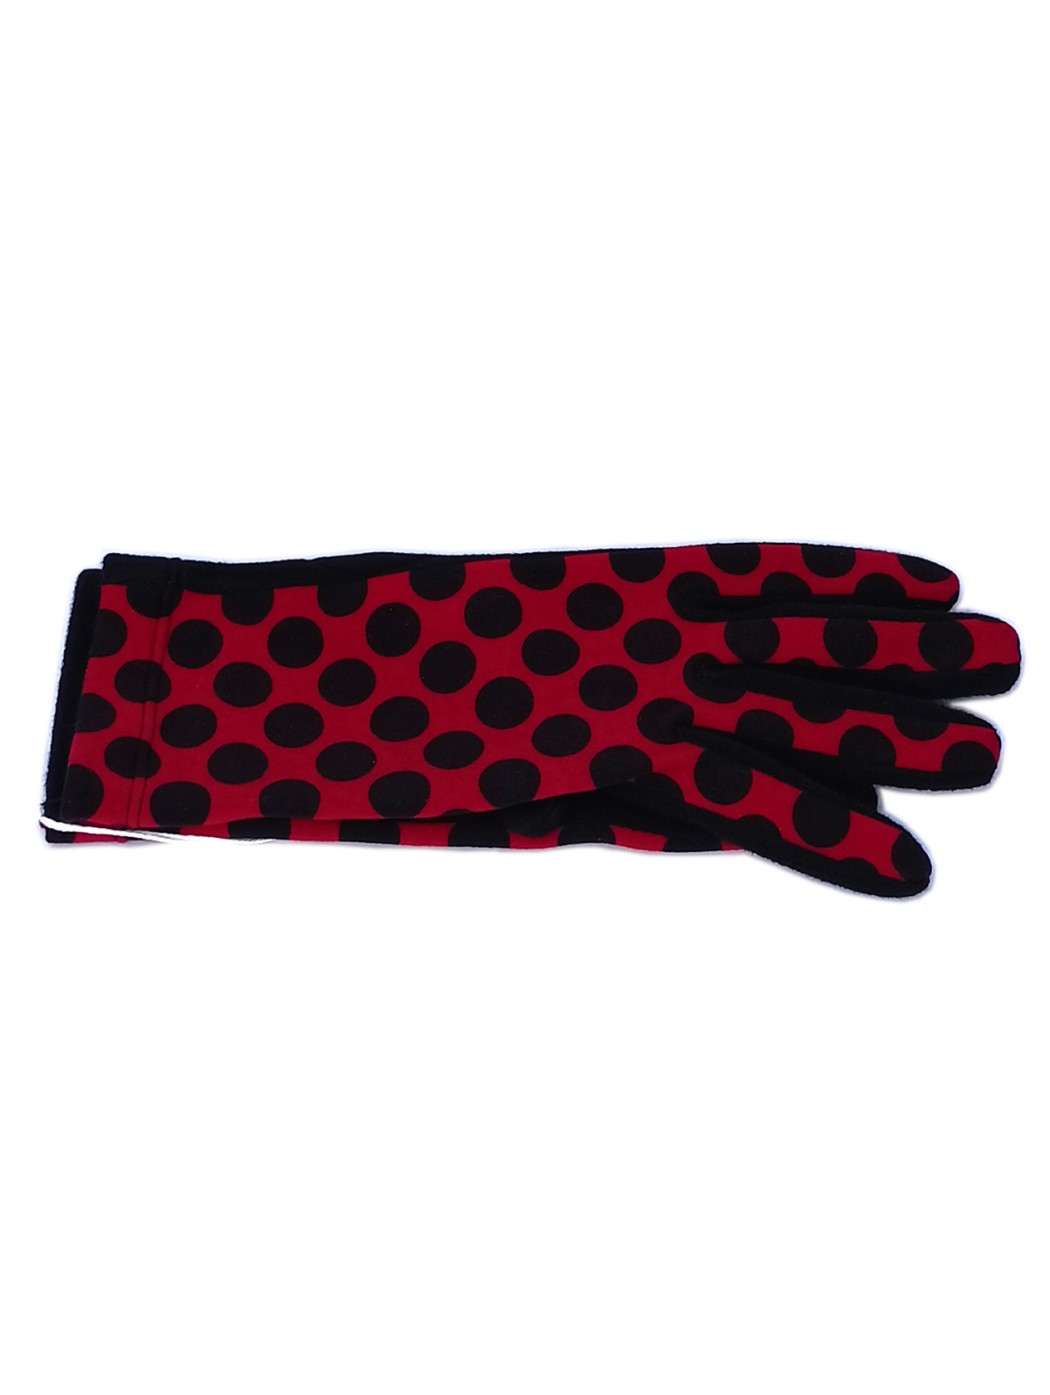 Black and red polka dots...